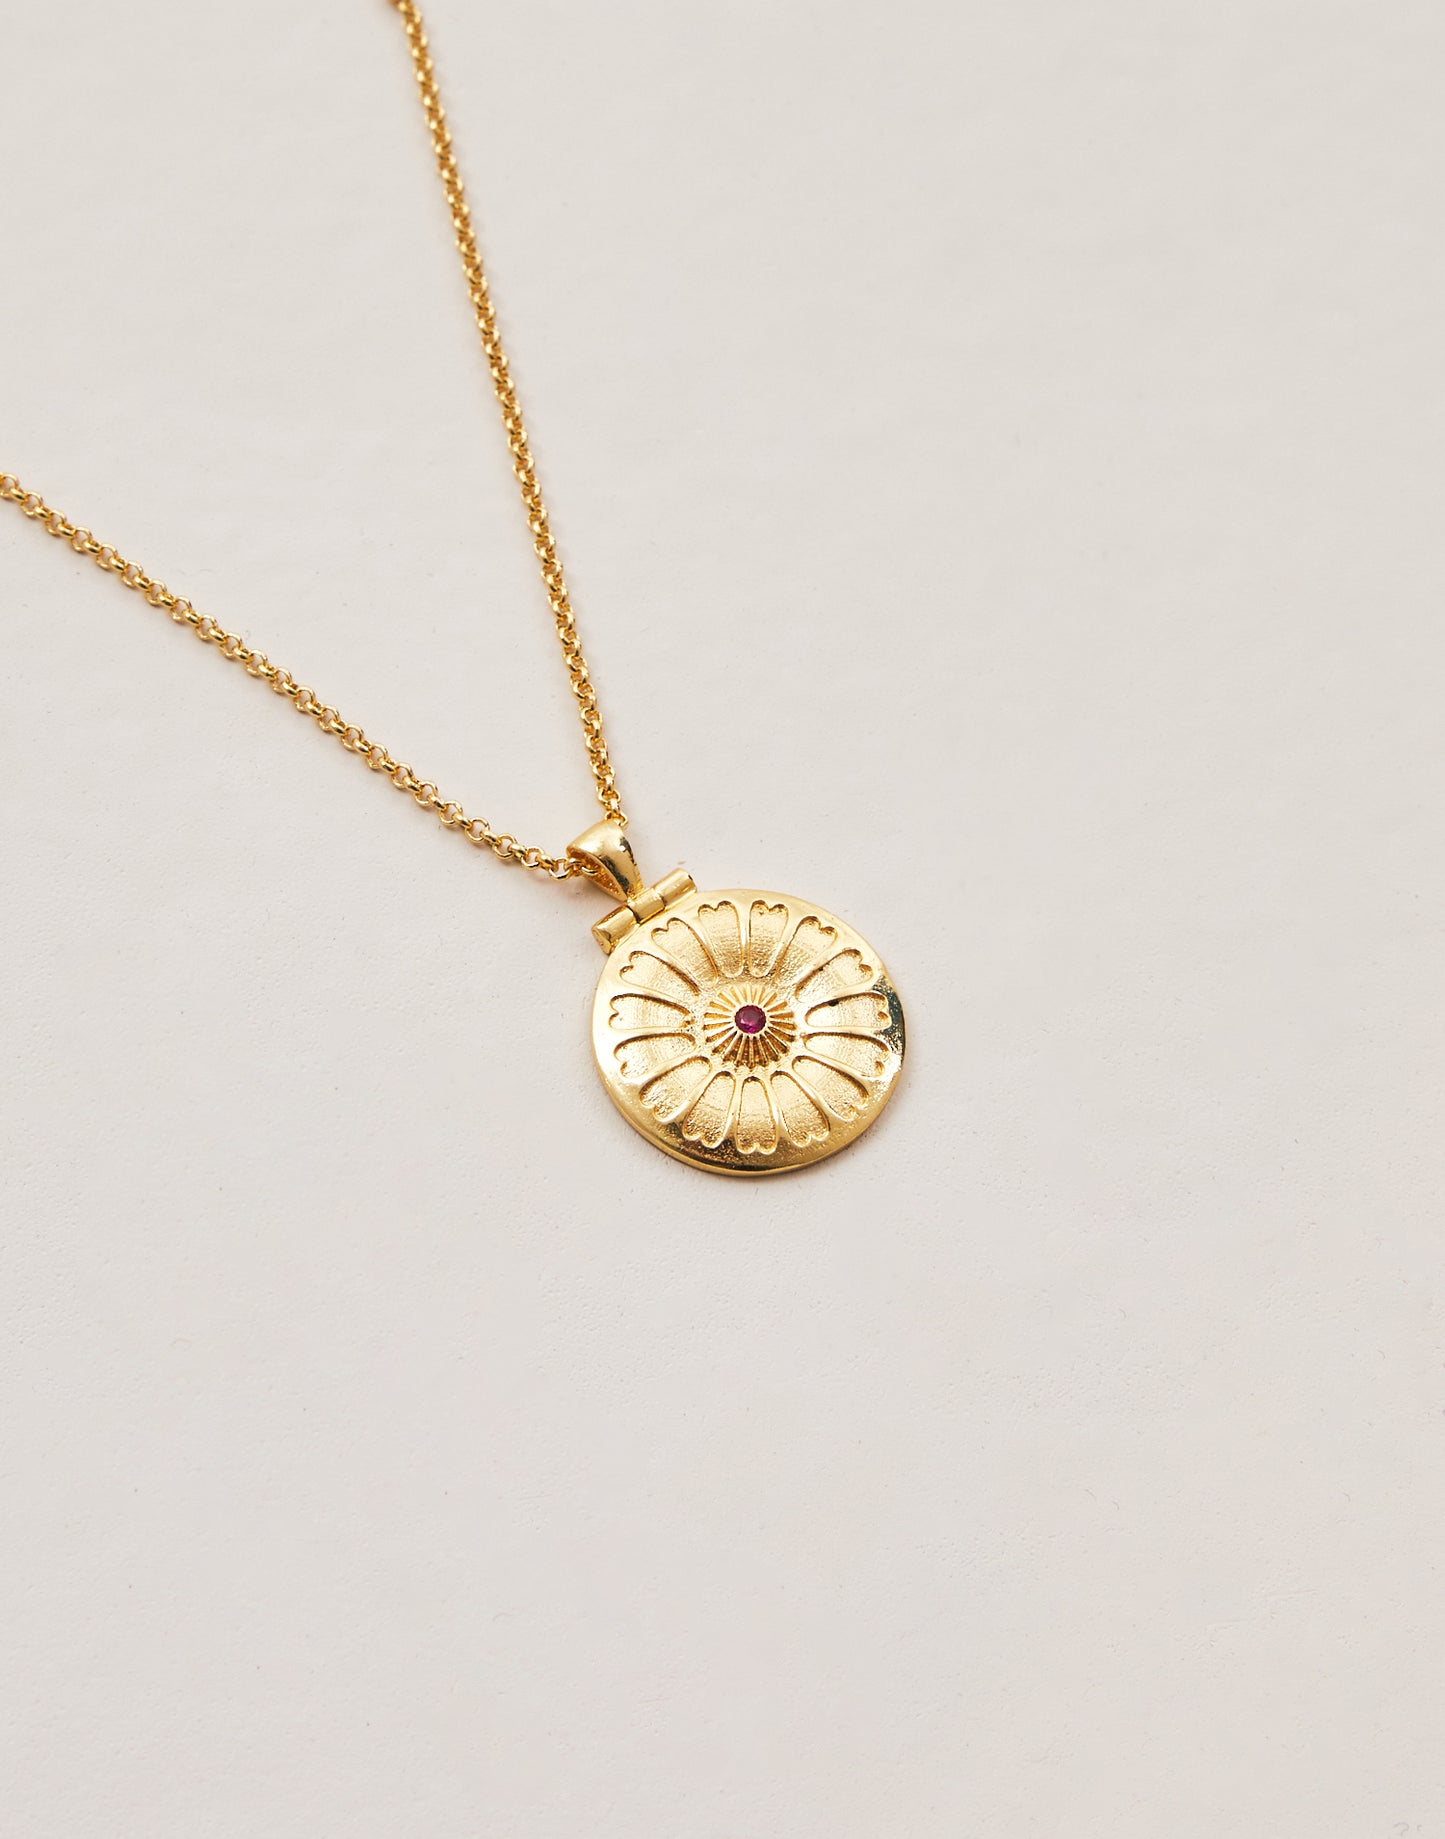 Gold charm necklace